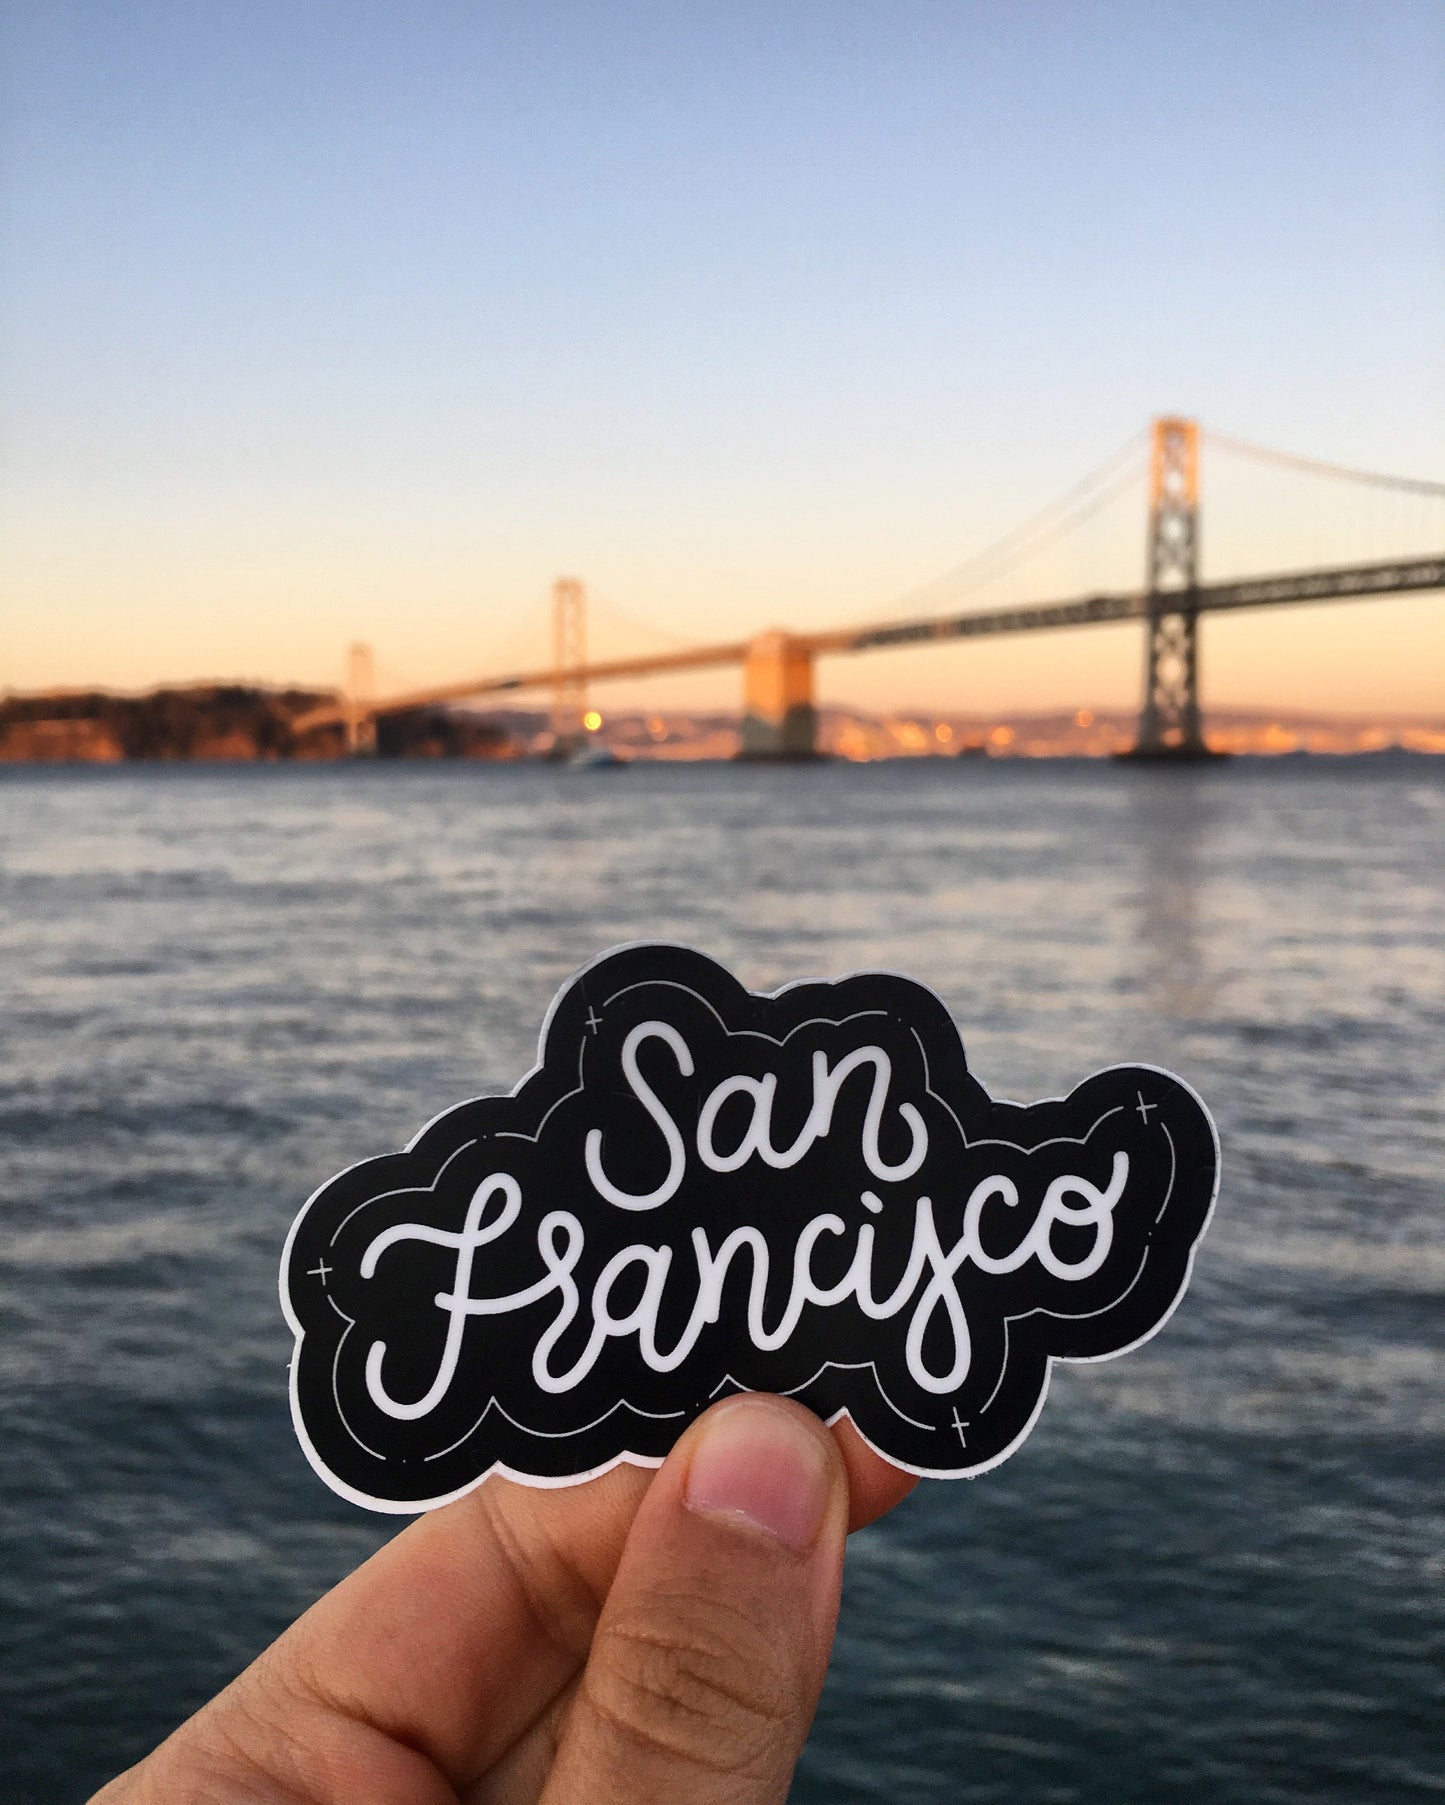 A hand holding a black and white JaneLi.Co sticker that says "San Francisco" in cursive lettering in front of the Bay Bridge in San Francisco, California.